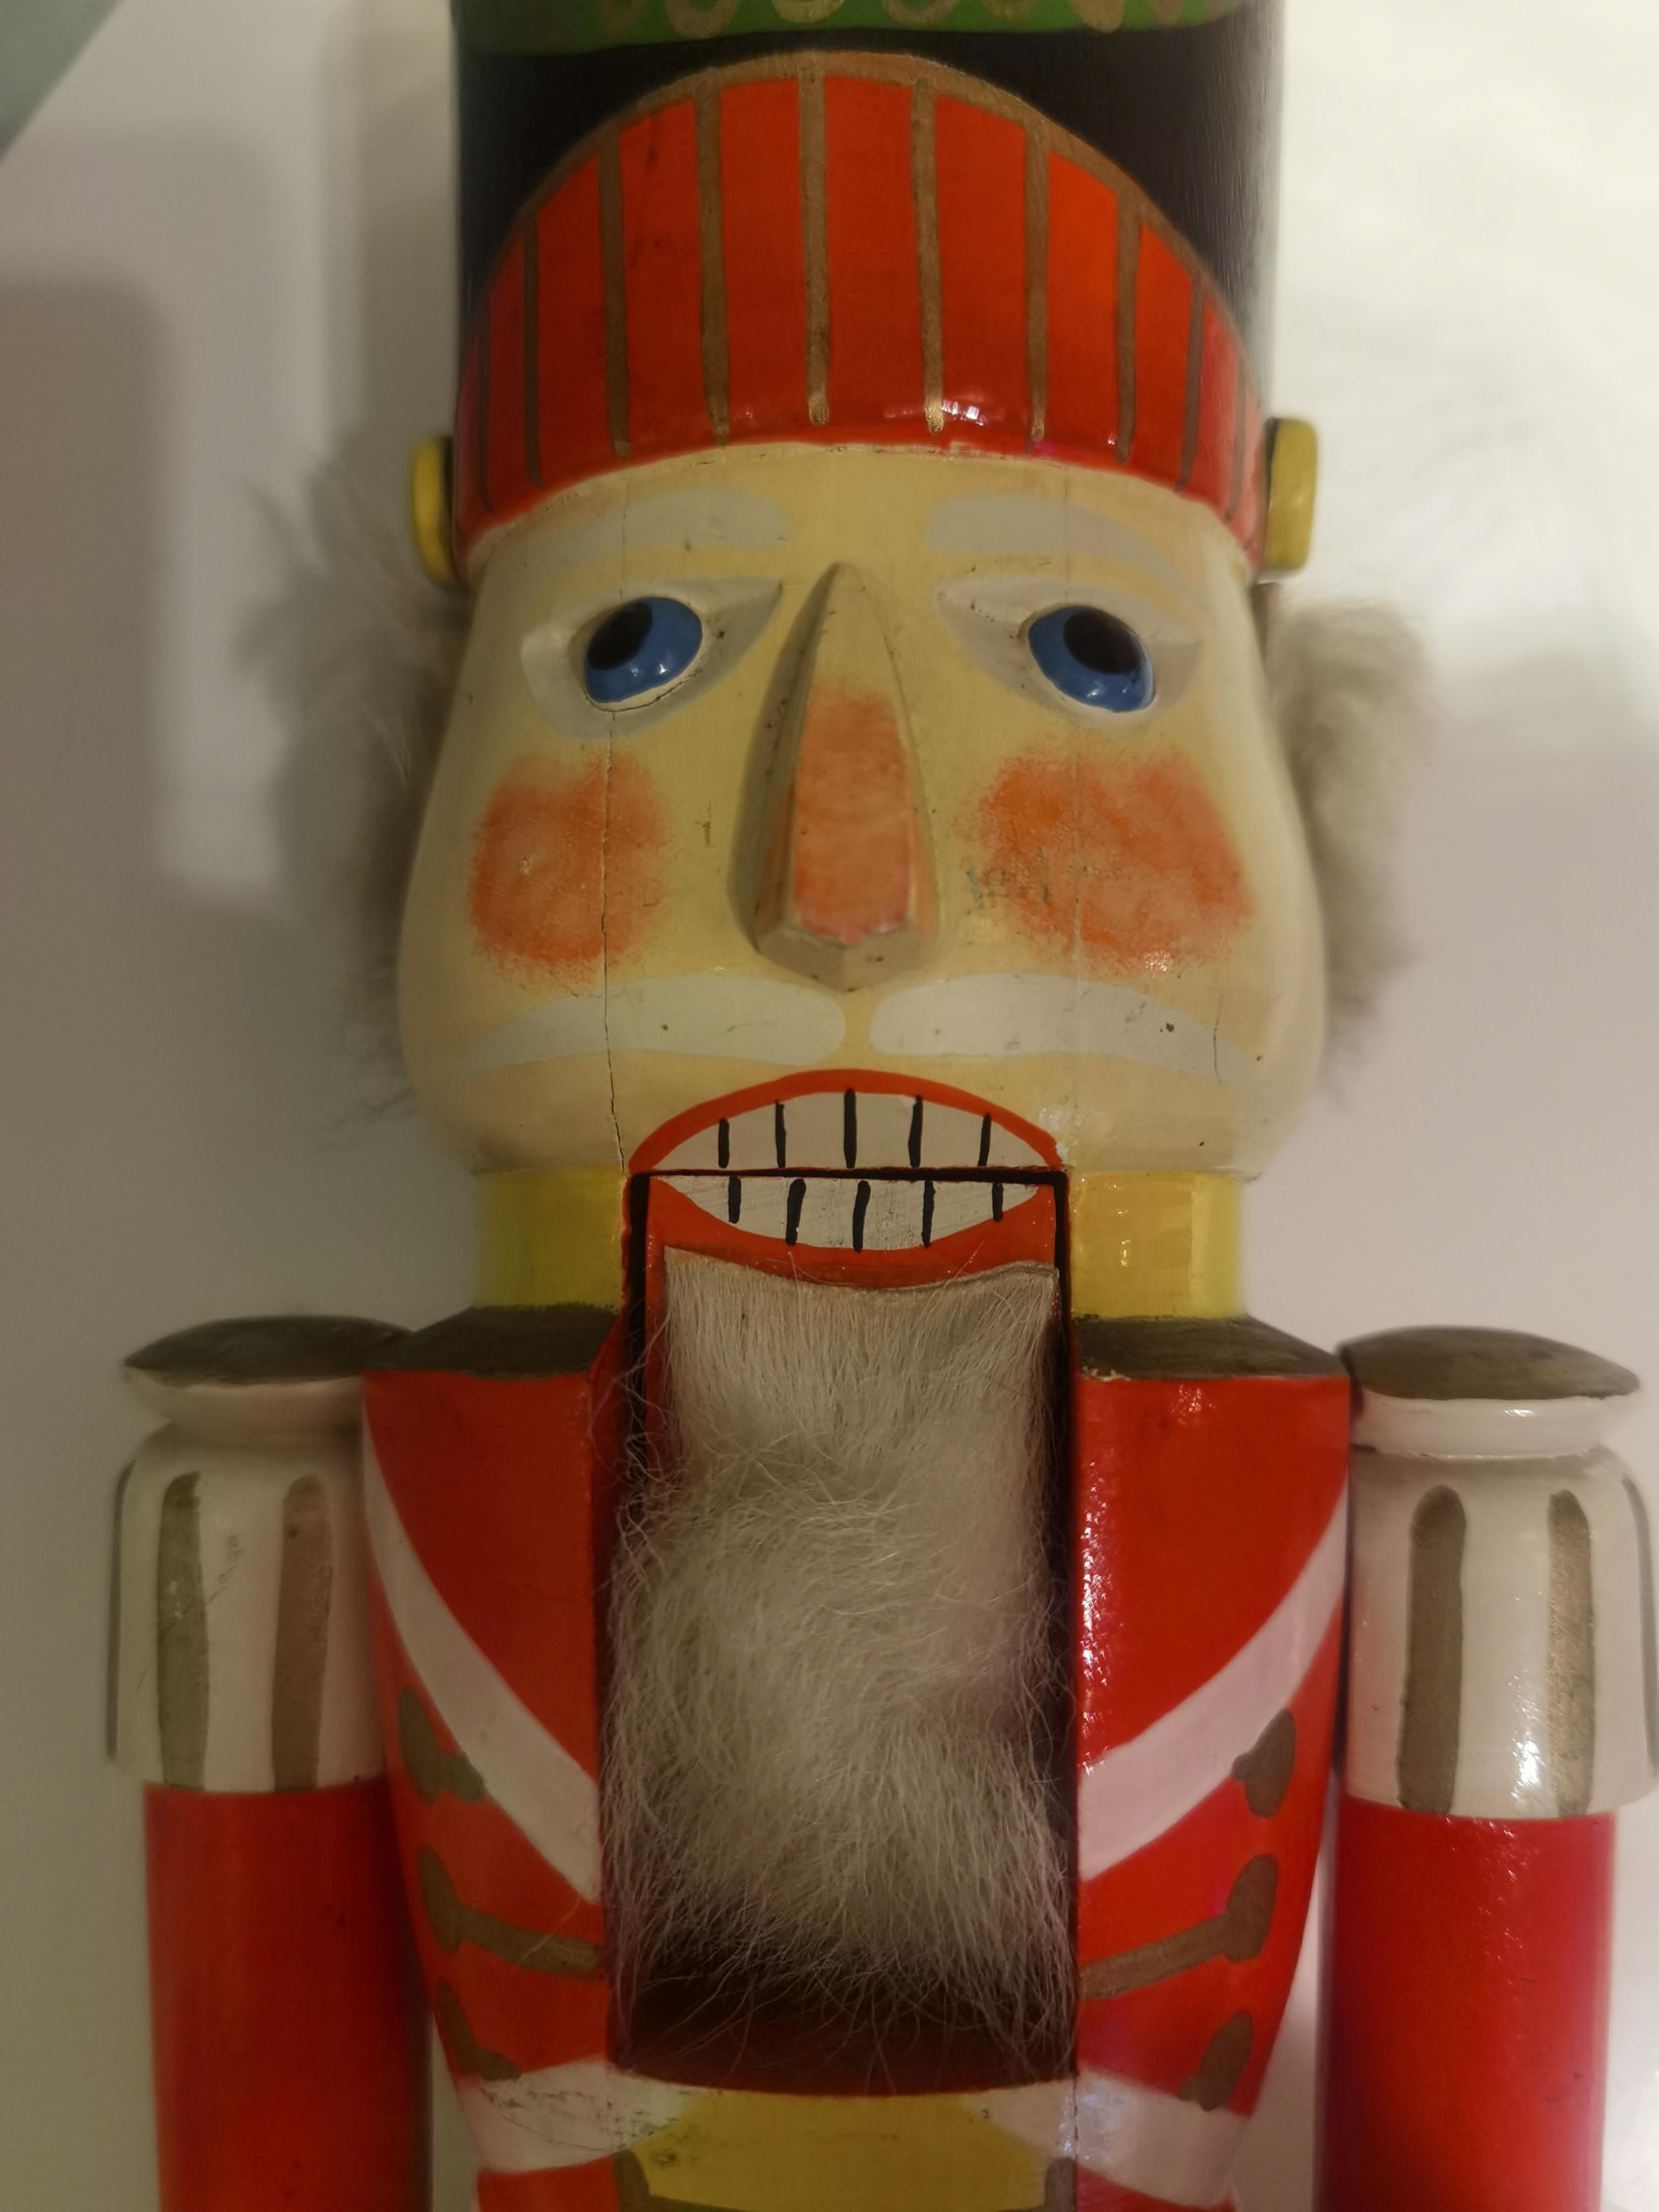 Large vintage wooden nutcracker figure from the Erzgebirge. The region Erzgebirge formerly Eastern Germany is famous for this special kind of nutcrackers, where intricate carving has been their home. Completely hand-painted in blue and red colors